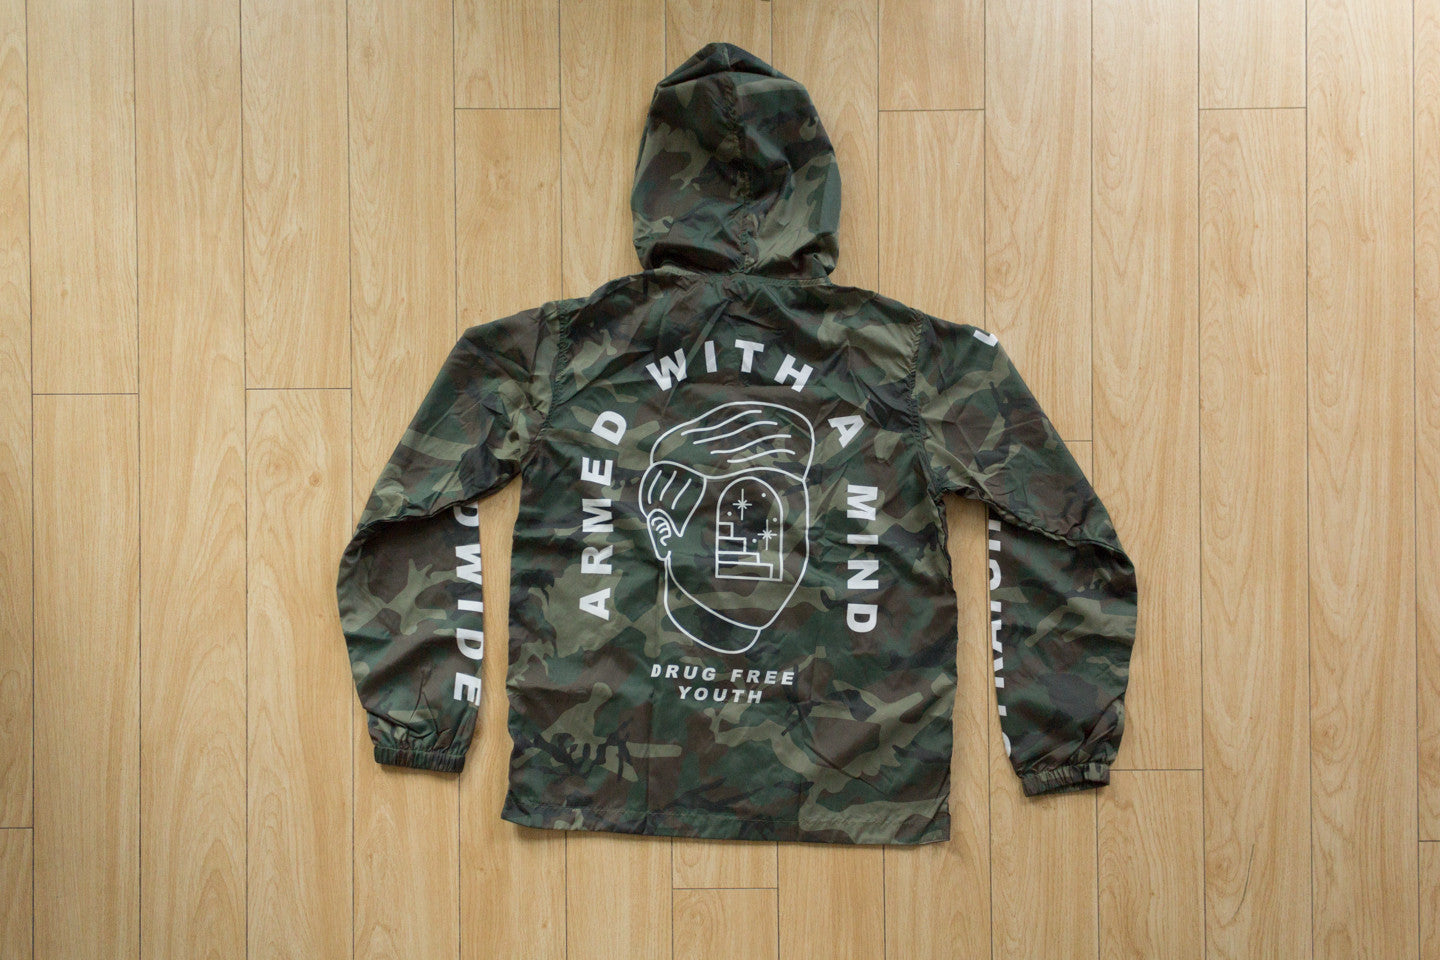 Armed With A Mind straight edge windbreaker in camo